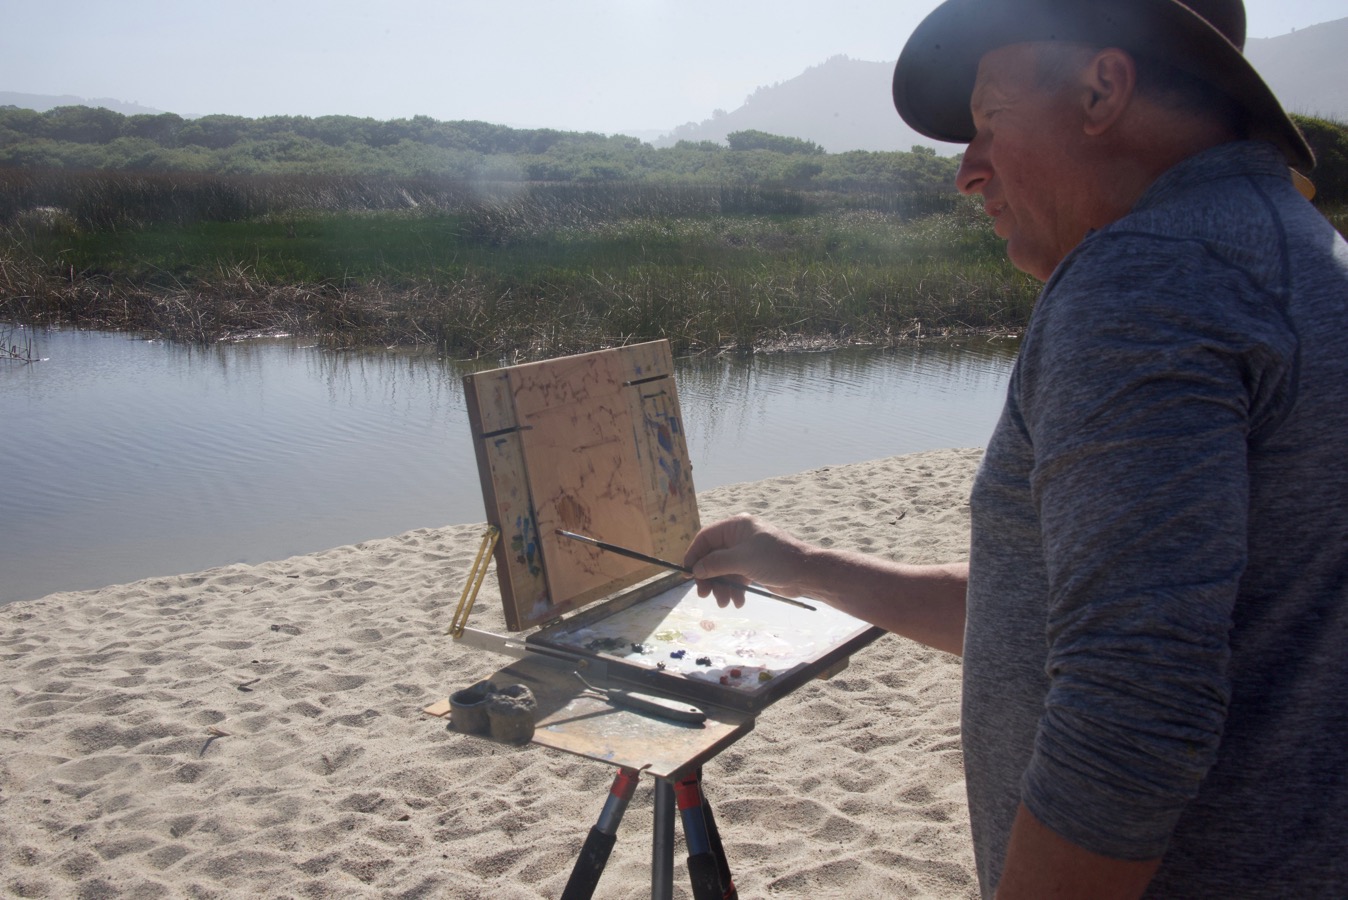 Paul uses an Open Box M that is mounted on a camera tripod. He starts with an indication brush drawing of the main shapes using a brush called a "bright". It's shorter than a flat which is a, well, flat rectangle. He moved his hand in sharp, short strokes